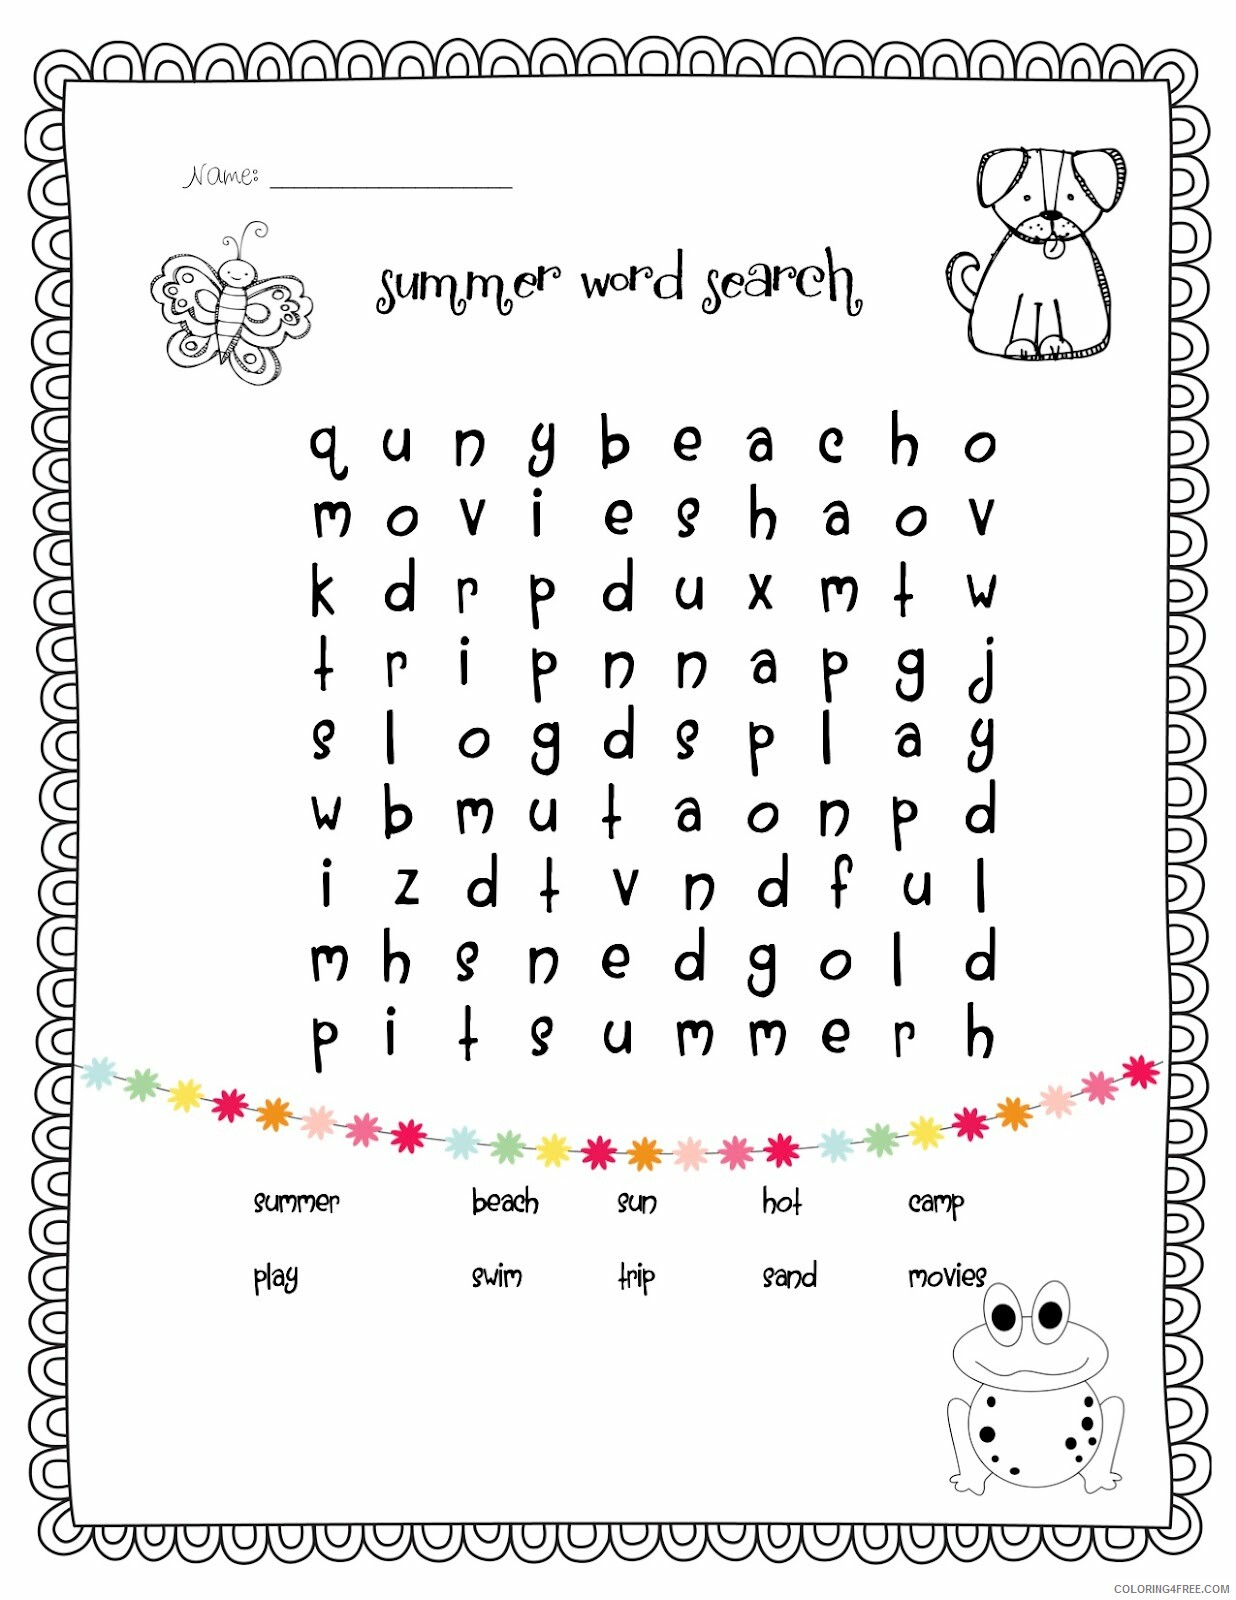 1st Grade Coloring Pages Educational Grammar Word Search Printable 2020 0053 Coloring4free